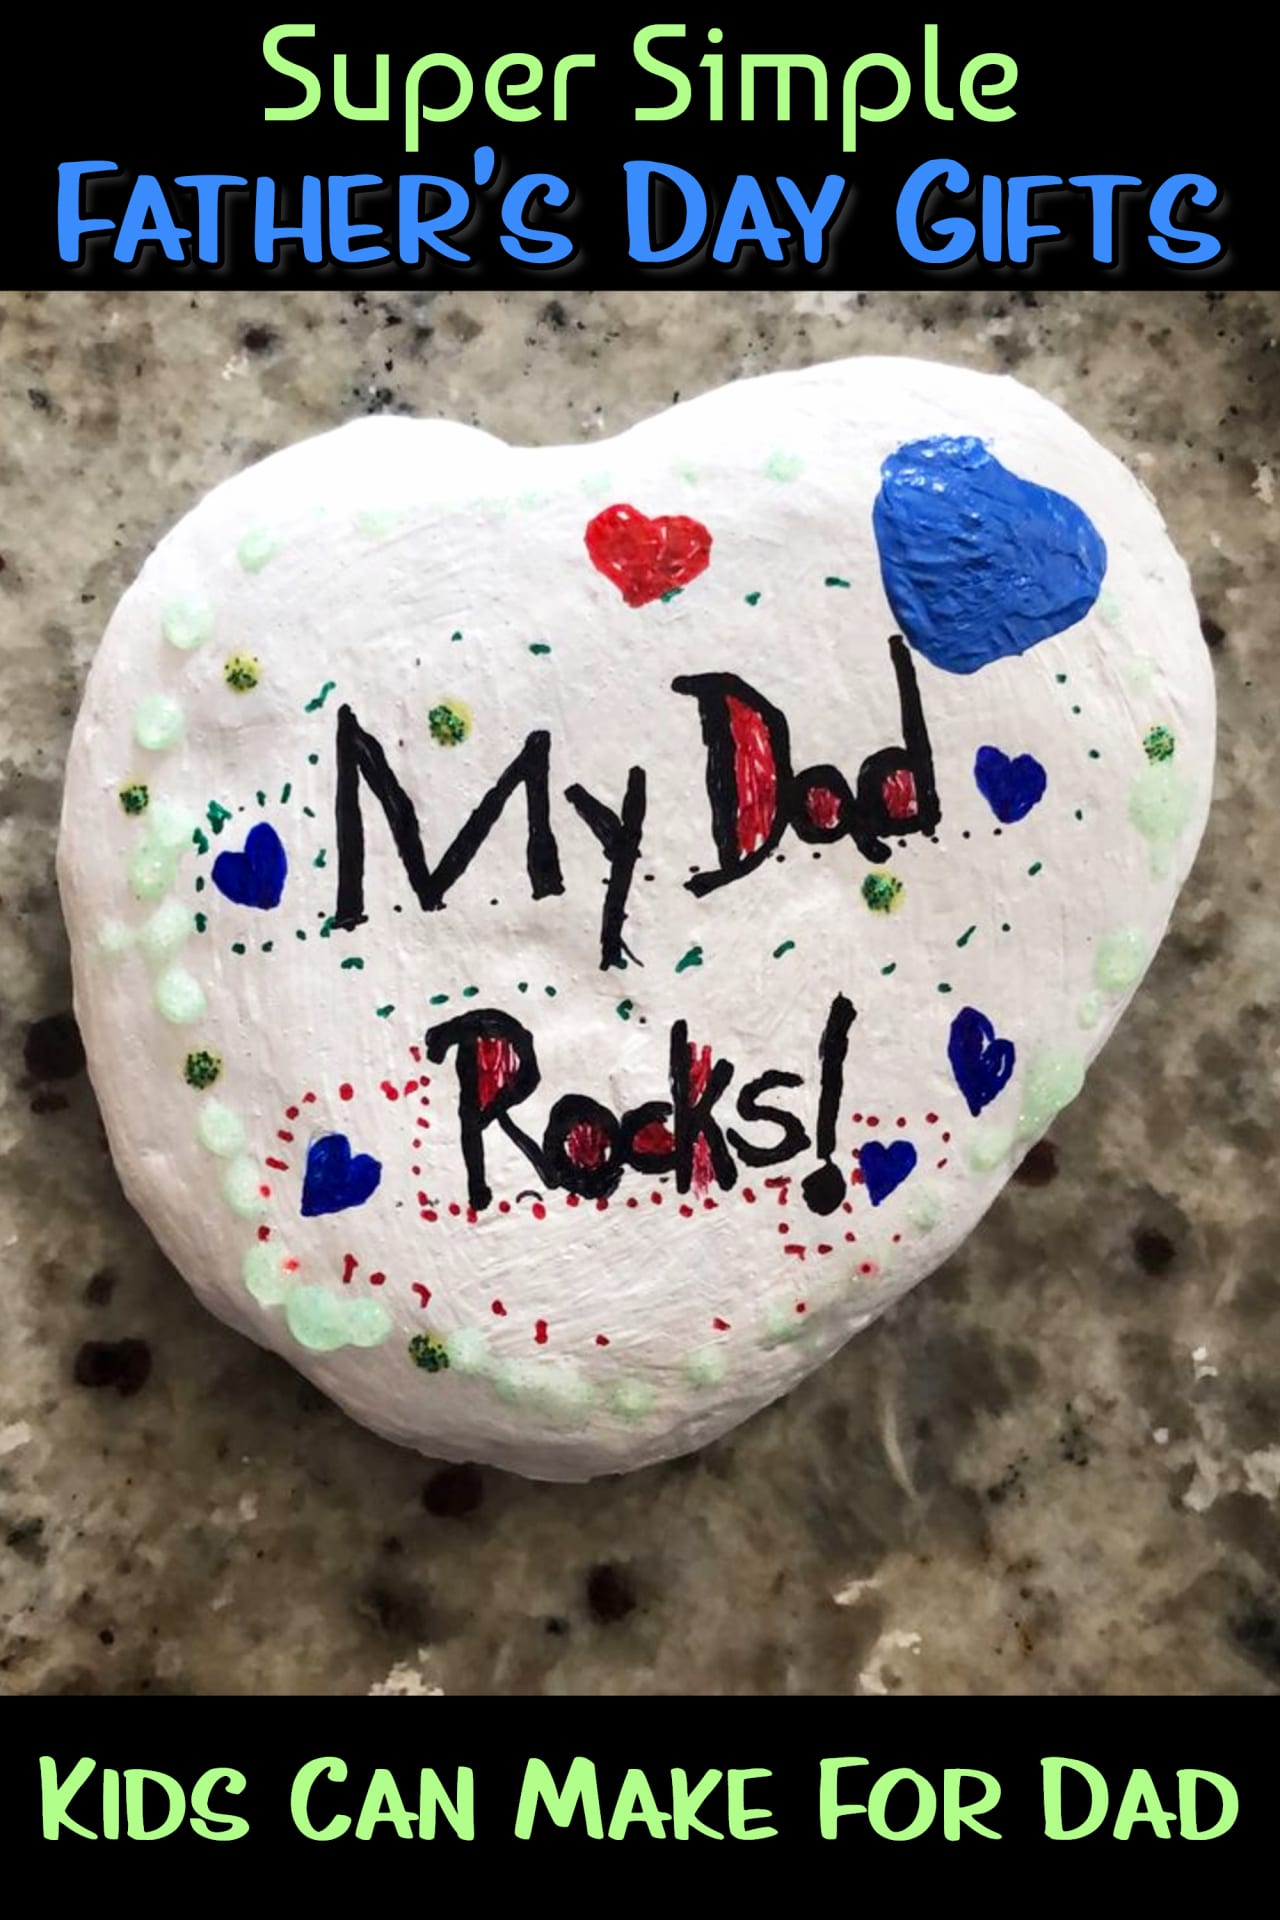 54-easy-diy-father-s-day-gifts-from-kids-and-fathers-day-crafts-for-kids-of-all-ages-clever